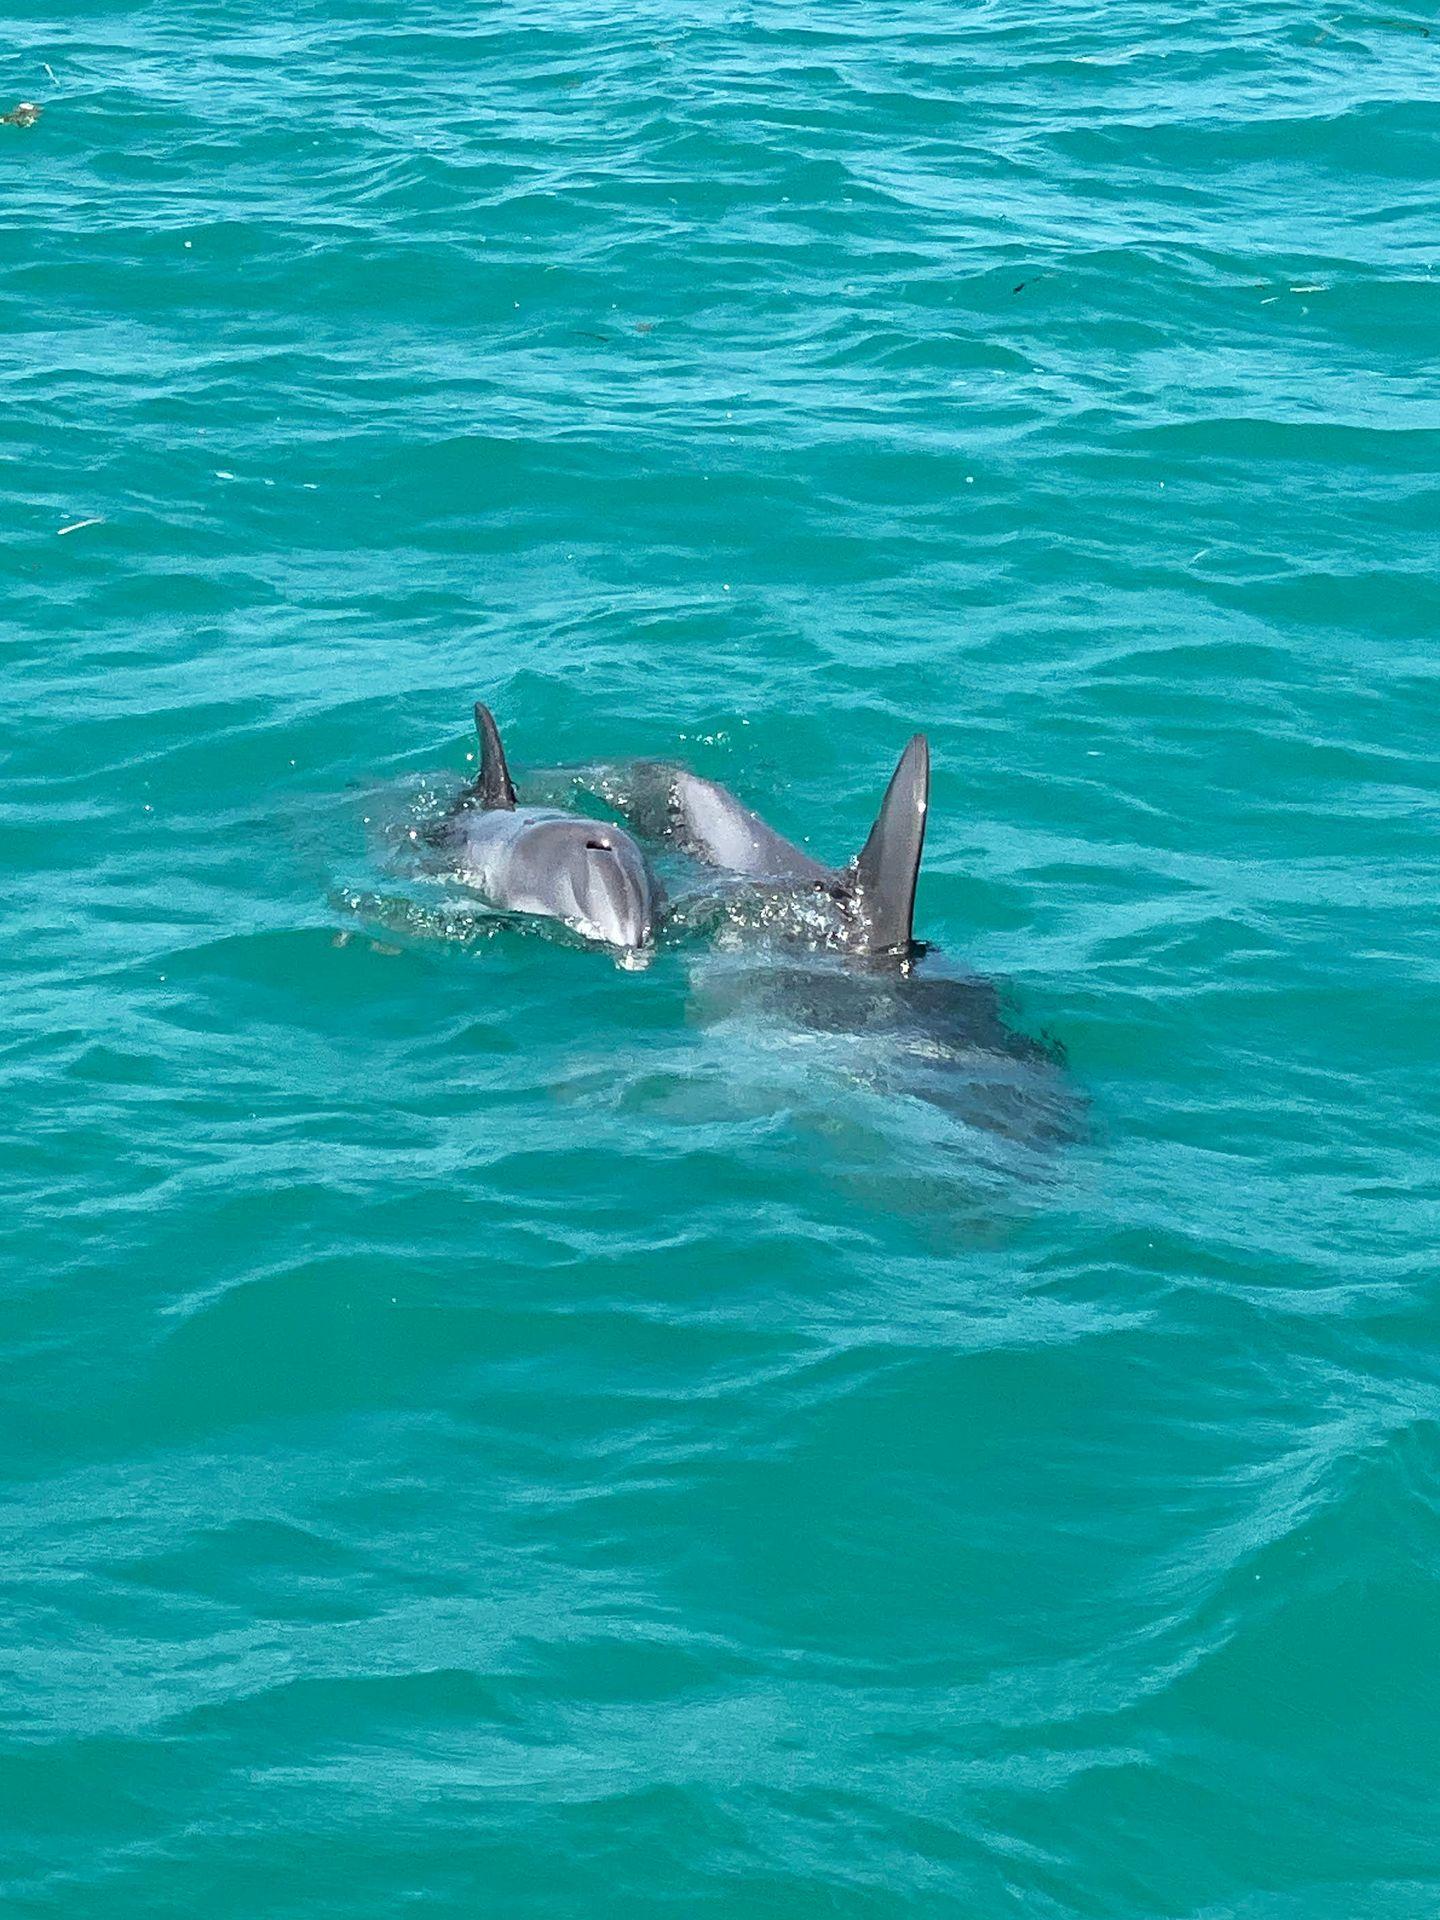 Two dolphins swimming next to each other in turquoise blue water